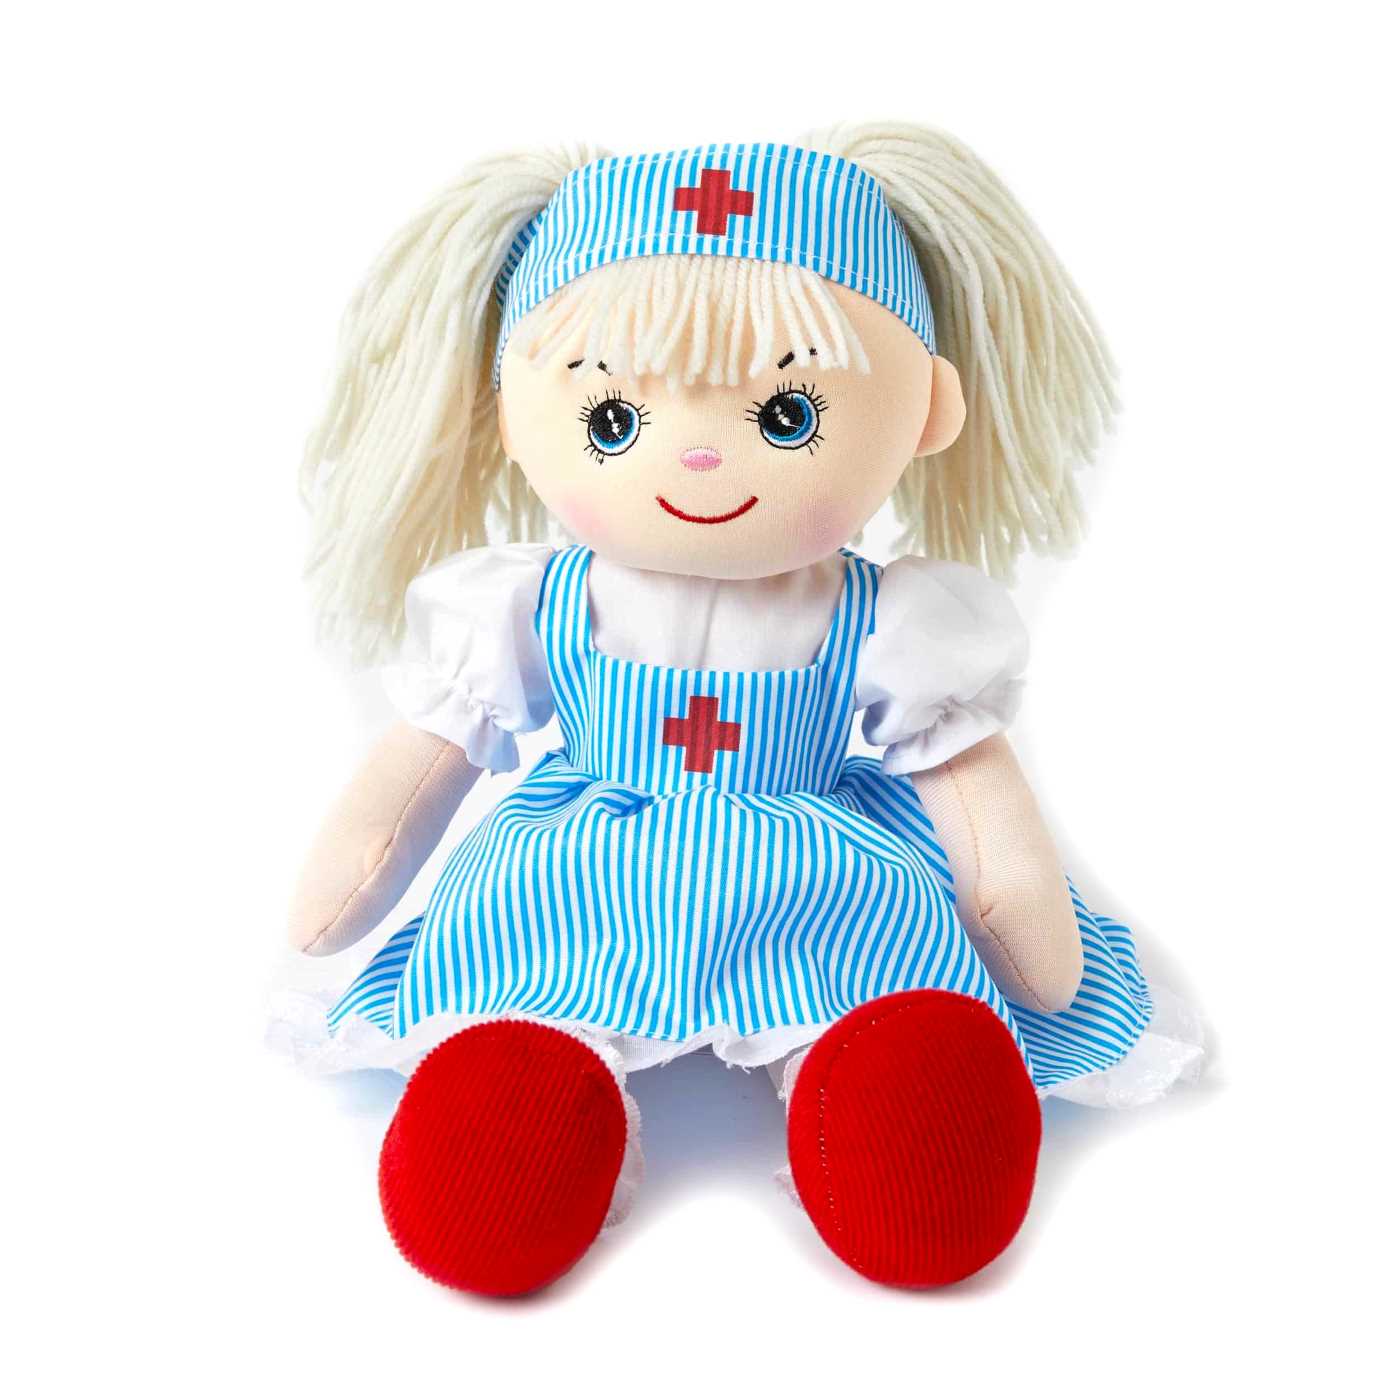 Madison is a soft body doll with blue eyes, pale skin and light blonde hair with a fringe. She is wearing a blue and white striped dress with a red cross in the middle of the bib. She has bright red boots on and a white puffy sleeve shirt with white frills on the edge of the dress. 